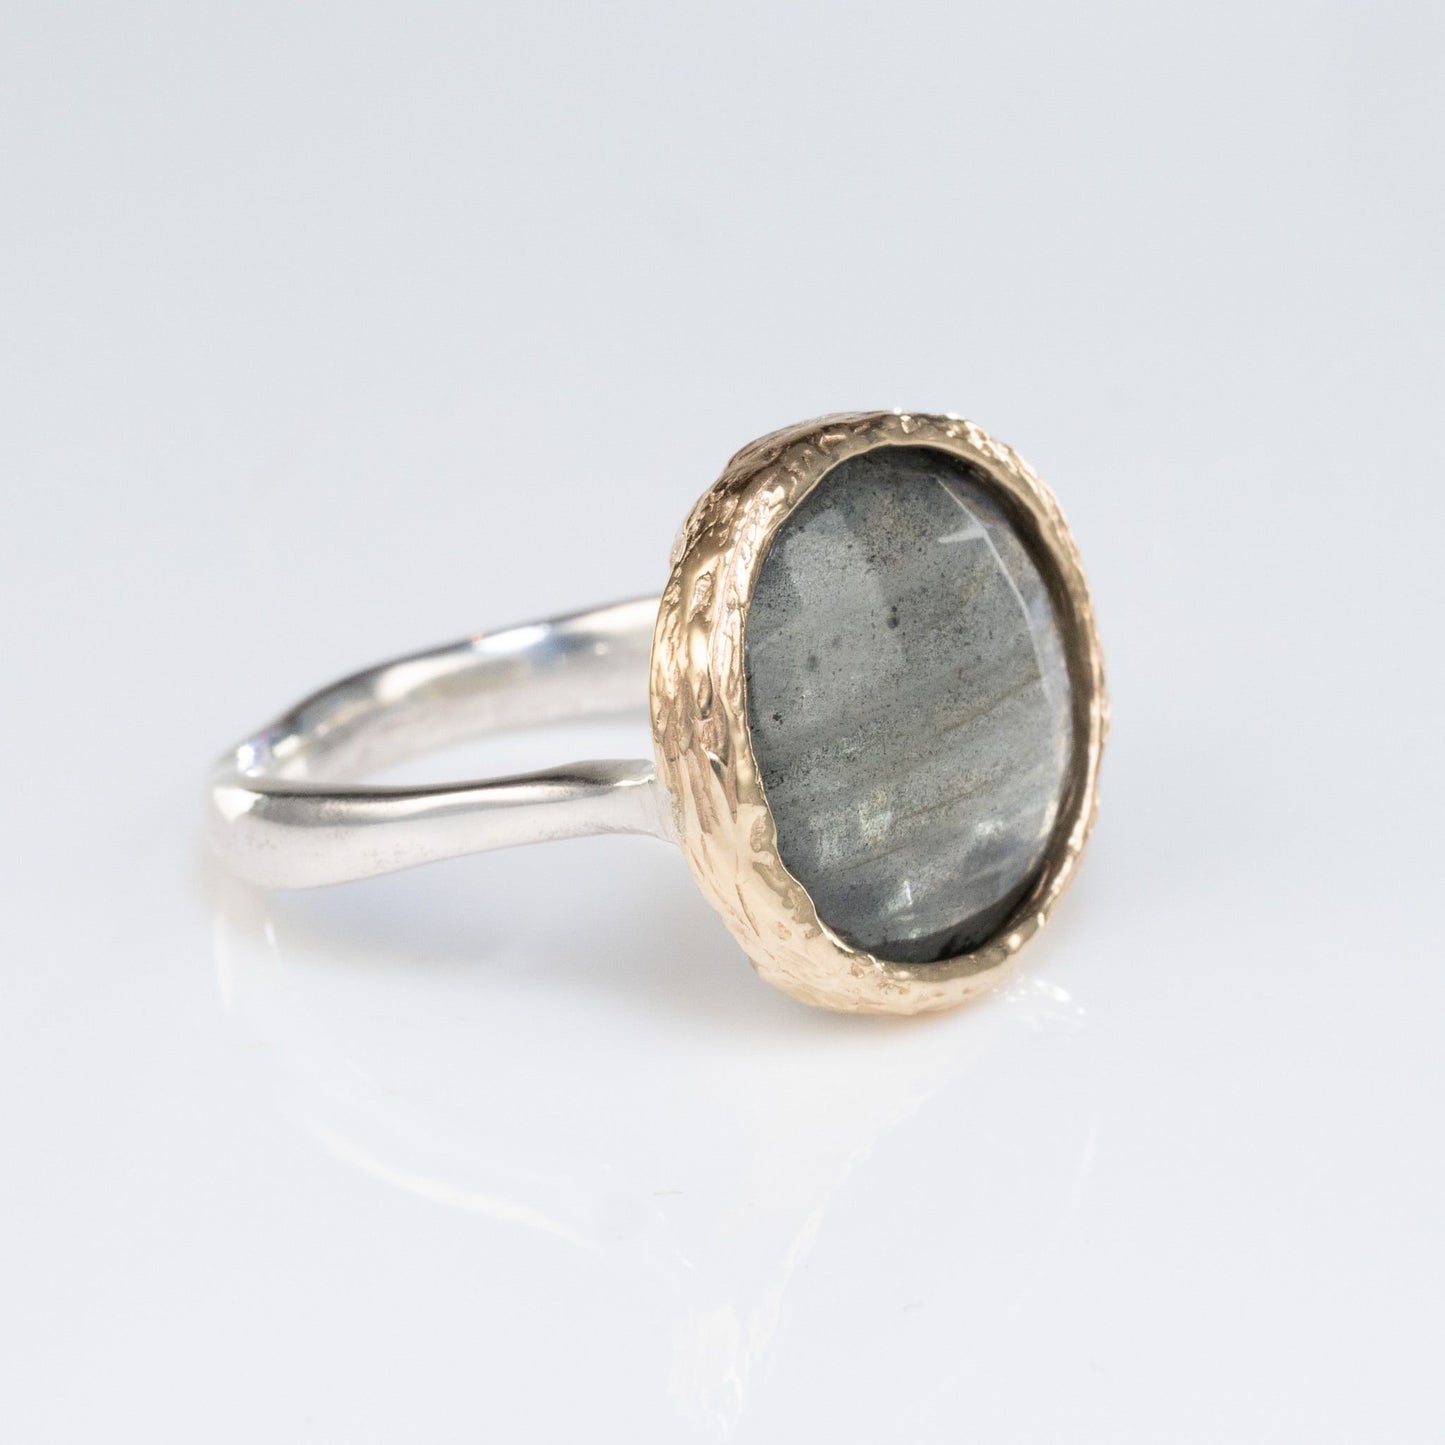 Danielle Welmond 14K and Sterling Banded Labradorite Ring